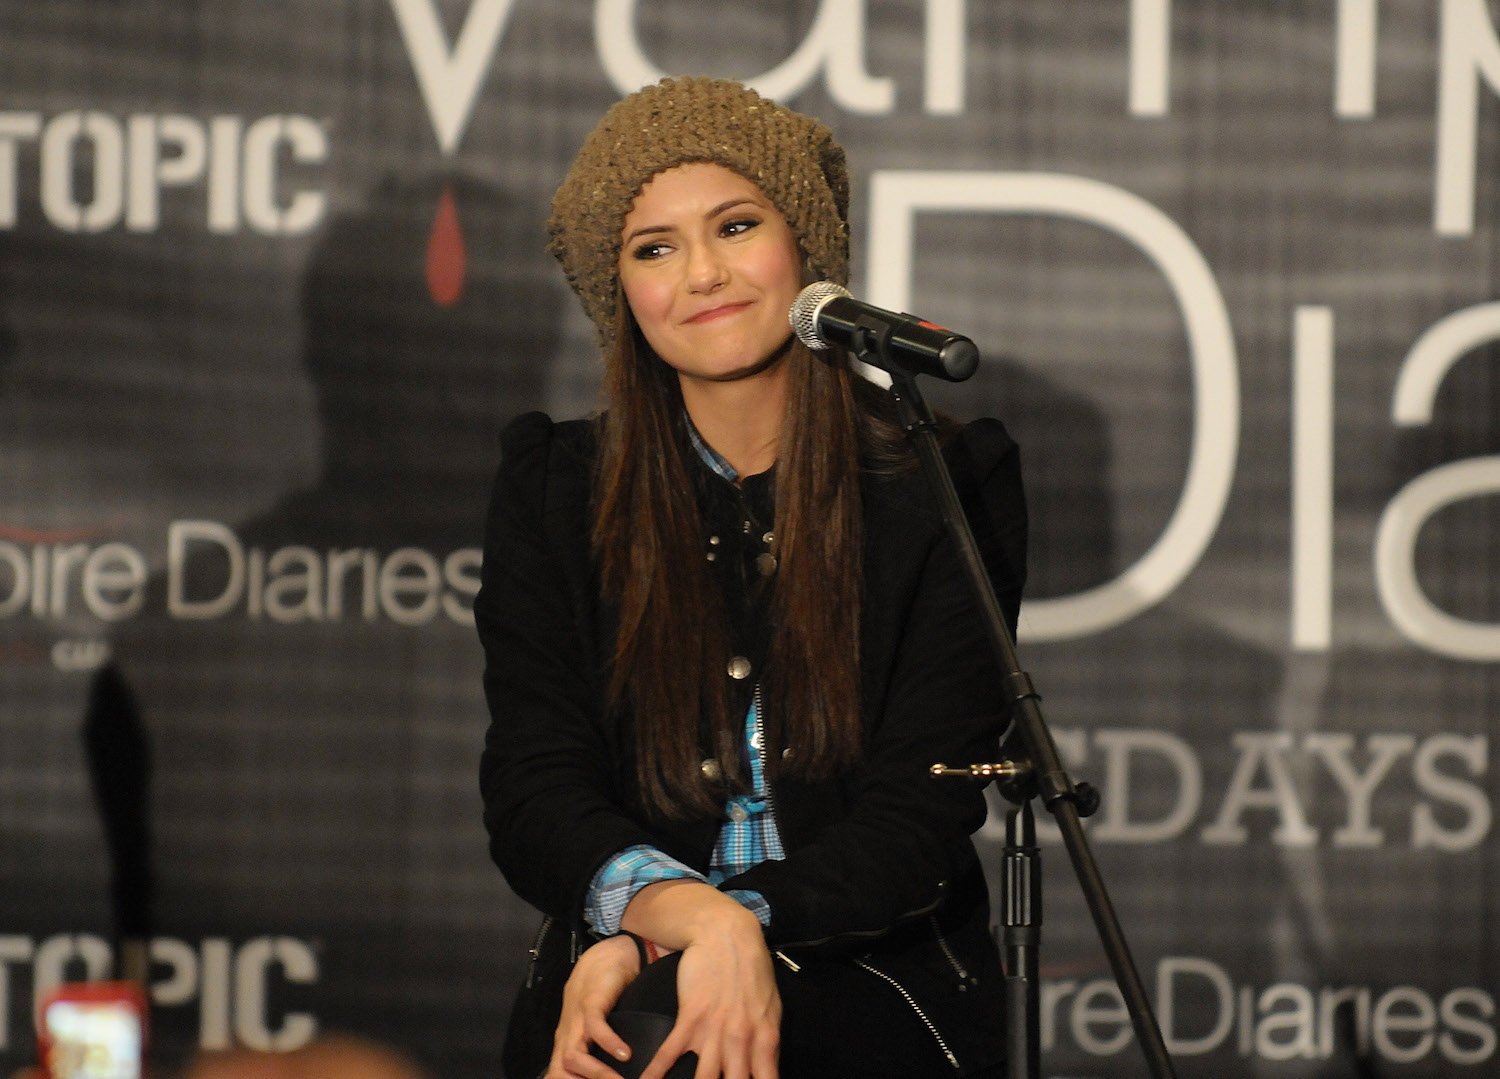 Nina Dobrev sitting at an event for 'The Vampire Diaries'